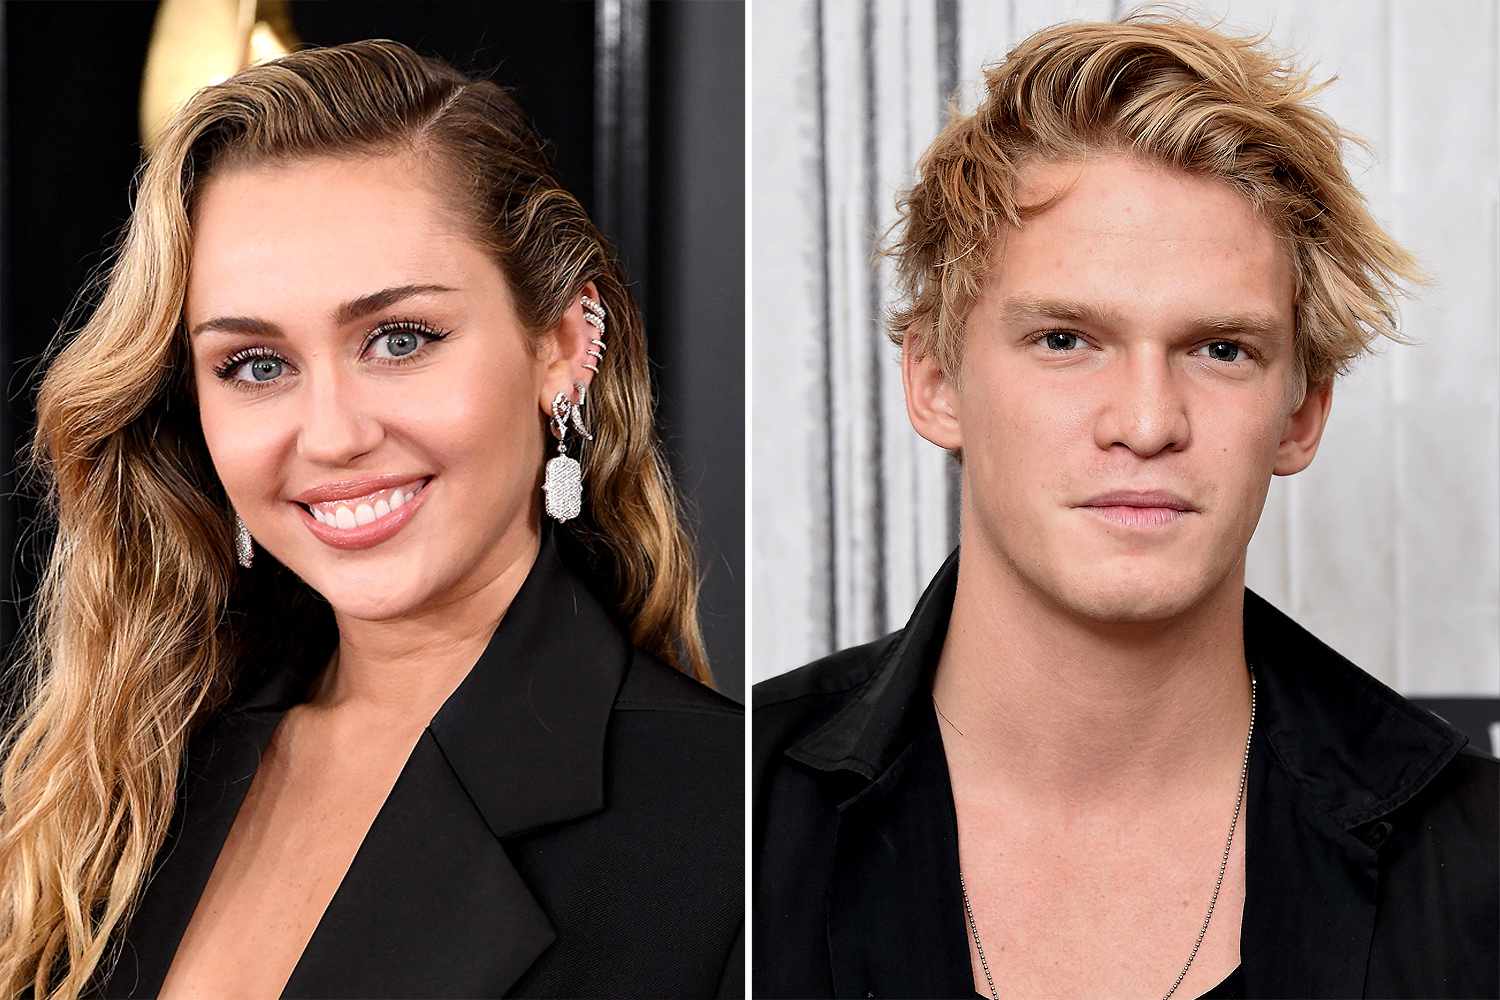 Dec. 2015: The Pair Are 'Best Friends' According to Cody